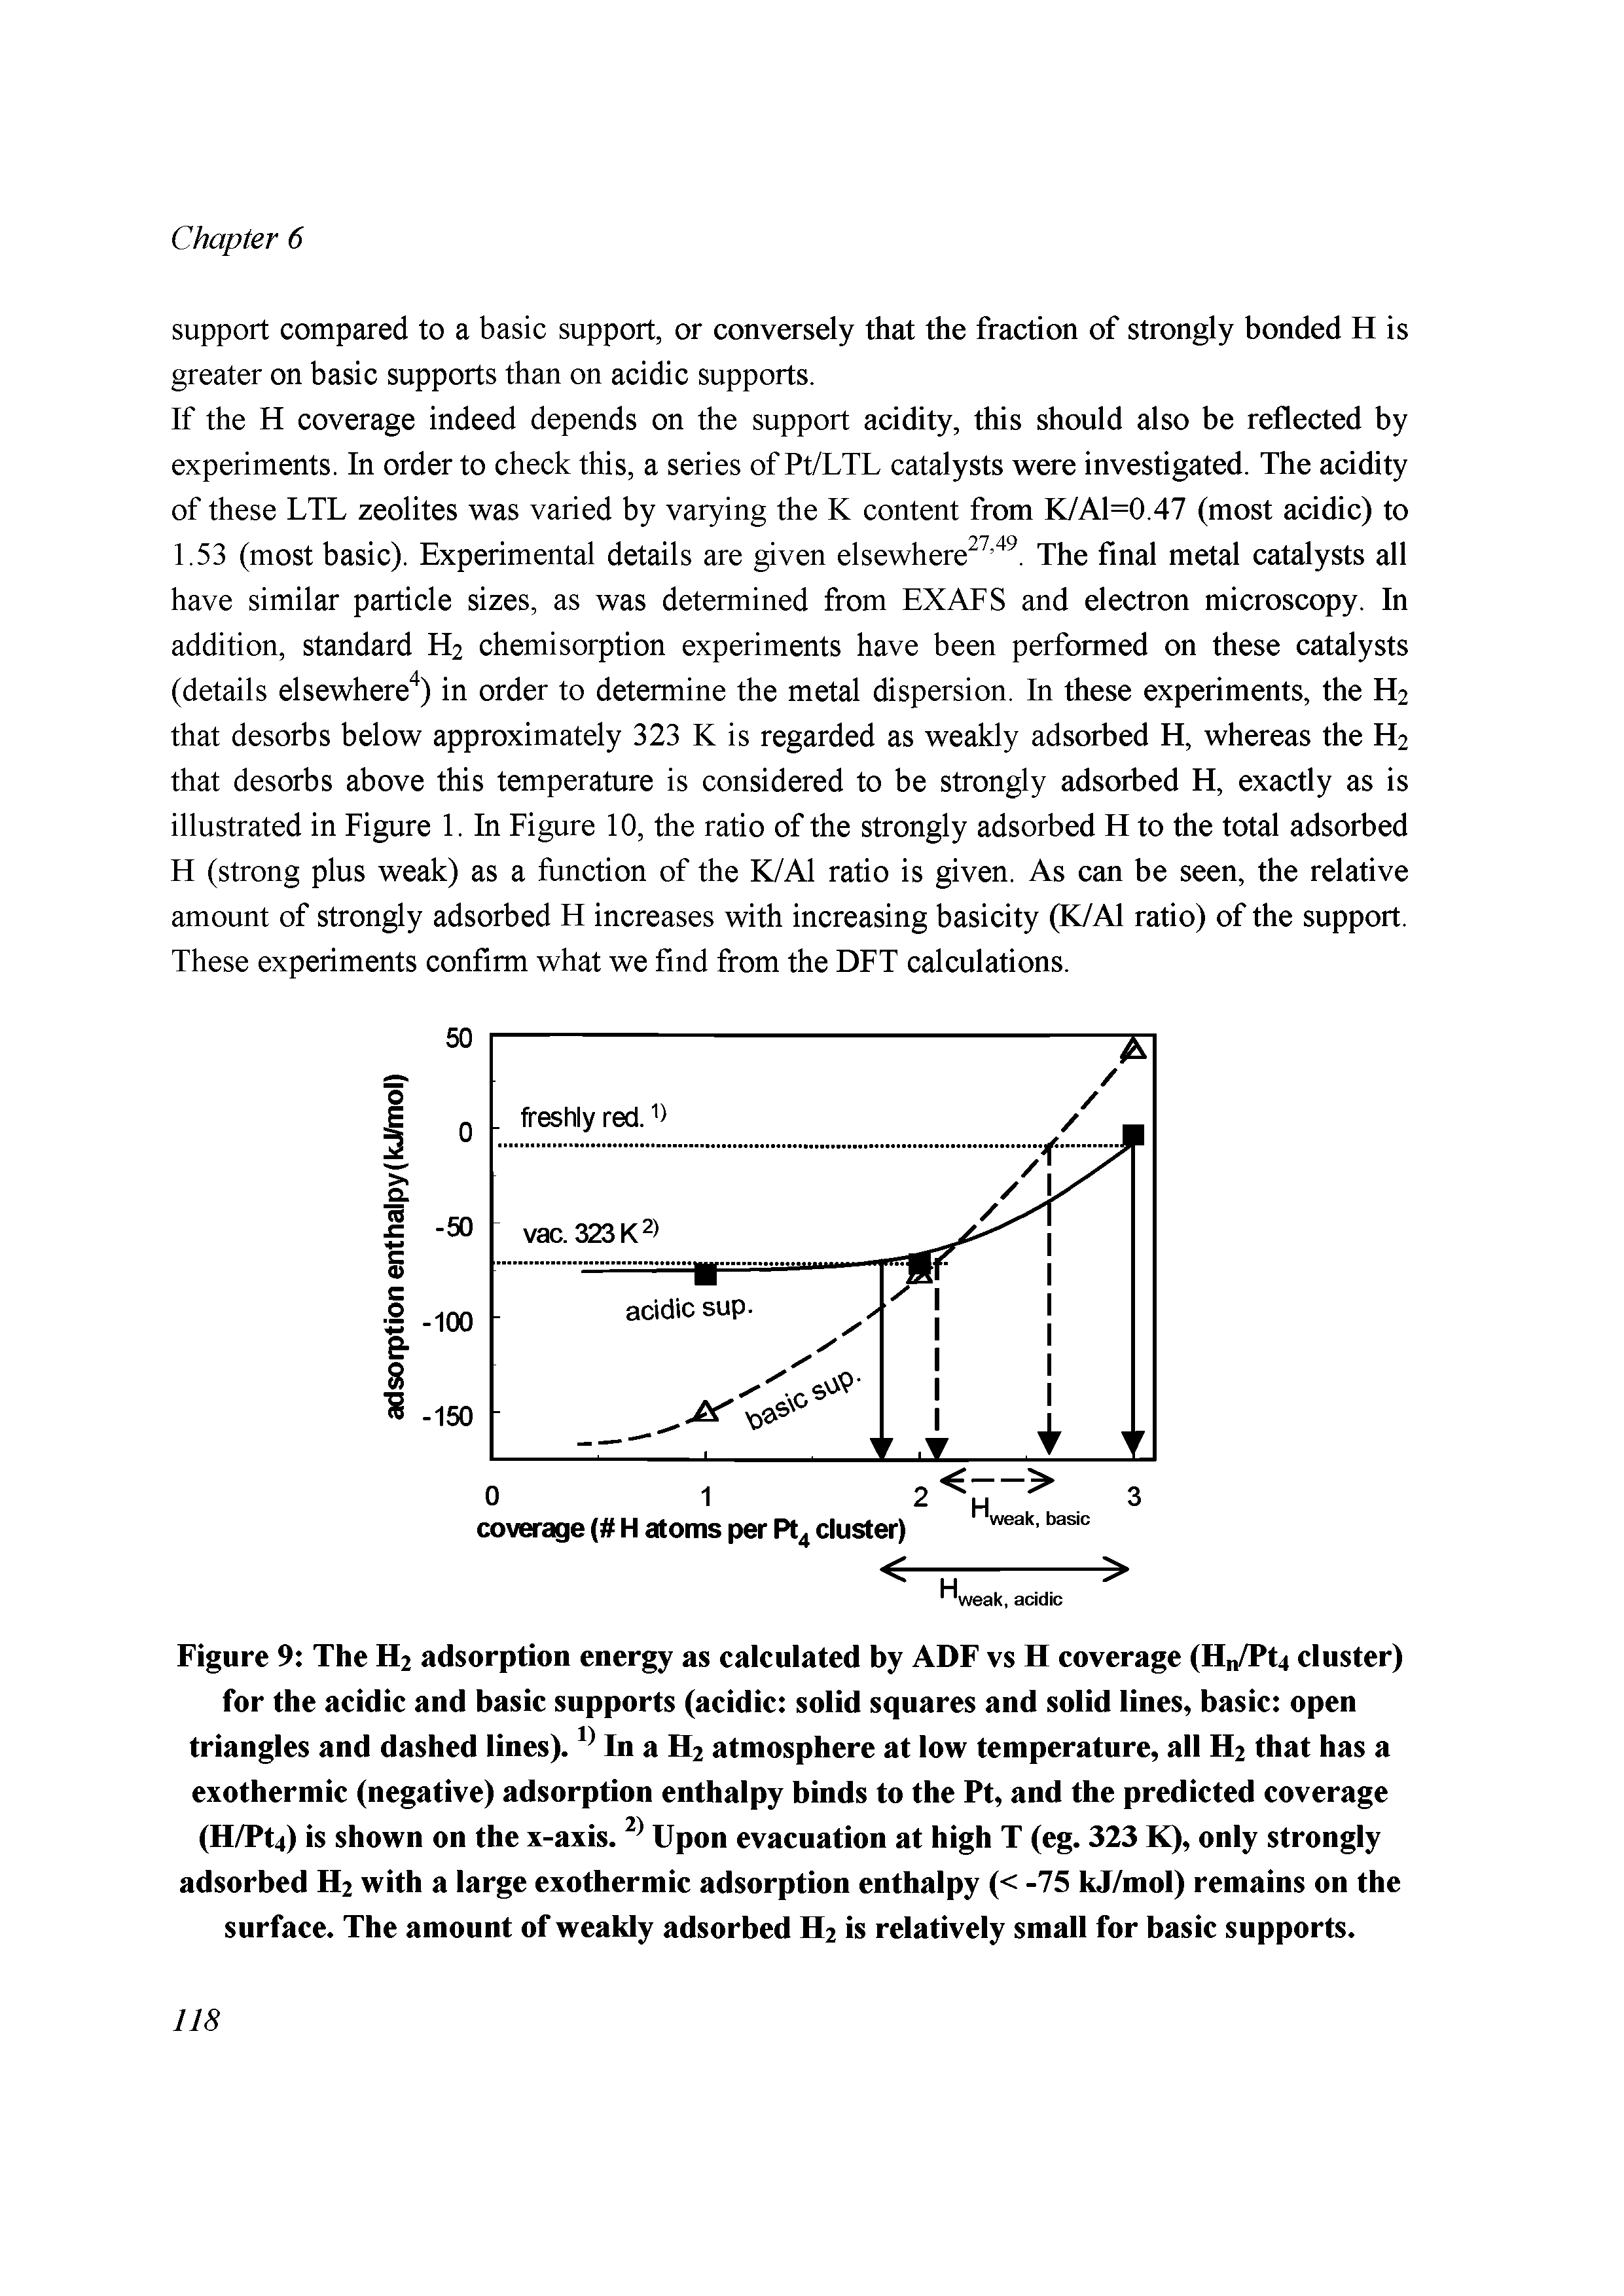 Figure 9 The H2 adsorption energy as calculated by ADF vs H coverage (Hn/Pt4 cluster) for the acidic and basic supports (acidic solid squares and solid lines, basic open triangles and dashed lines). In a H2 atmosphere at low temperature, all H2 that has a exothermic (negative) adsorption enthalpy binds to the Pt, and the predicted coverage (H/Pt4) is shown on the x-axis. 2) Upon evacuation at high T (eg. 323 K), only strongly adsorbed H2 with a large exothermic adsorption enthalpy (< -75 kJ/mol) remains on the surface. The amount of weakly adsorbed H2 is relatively small for basic supports.